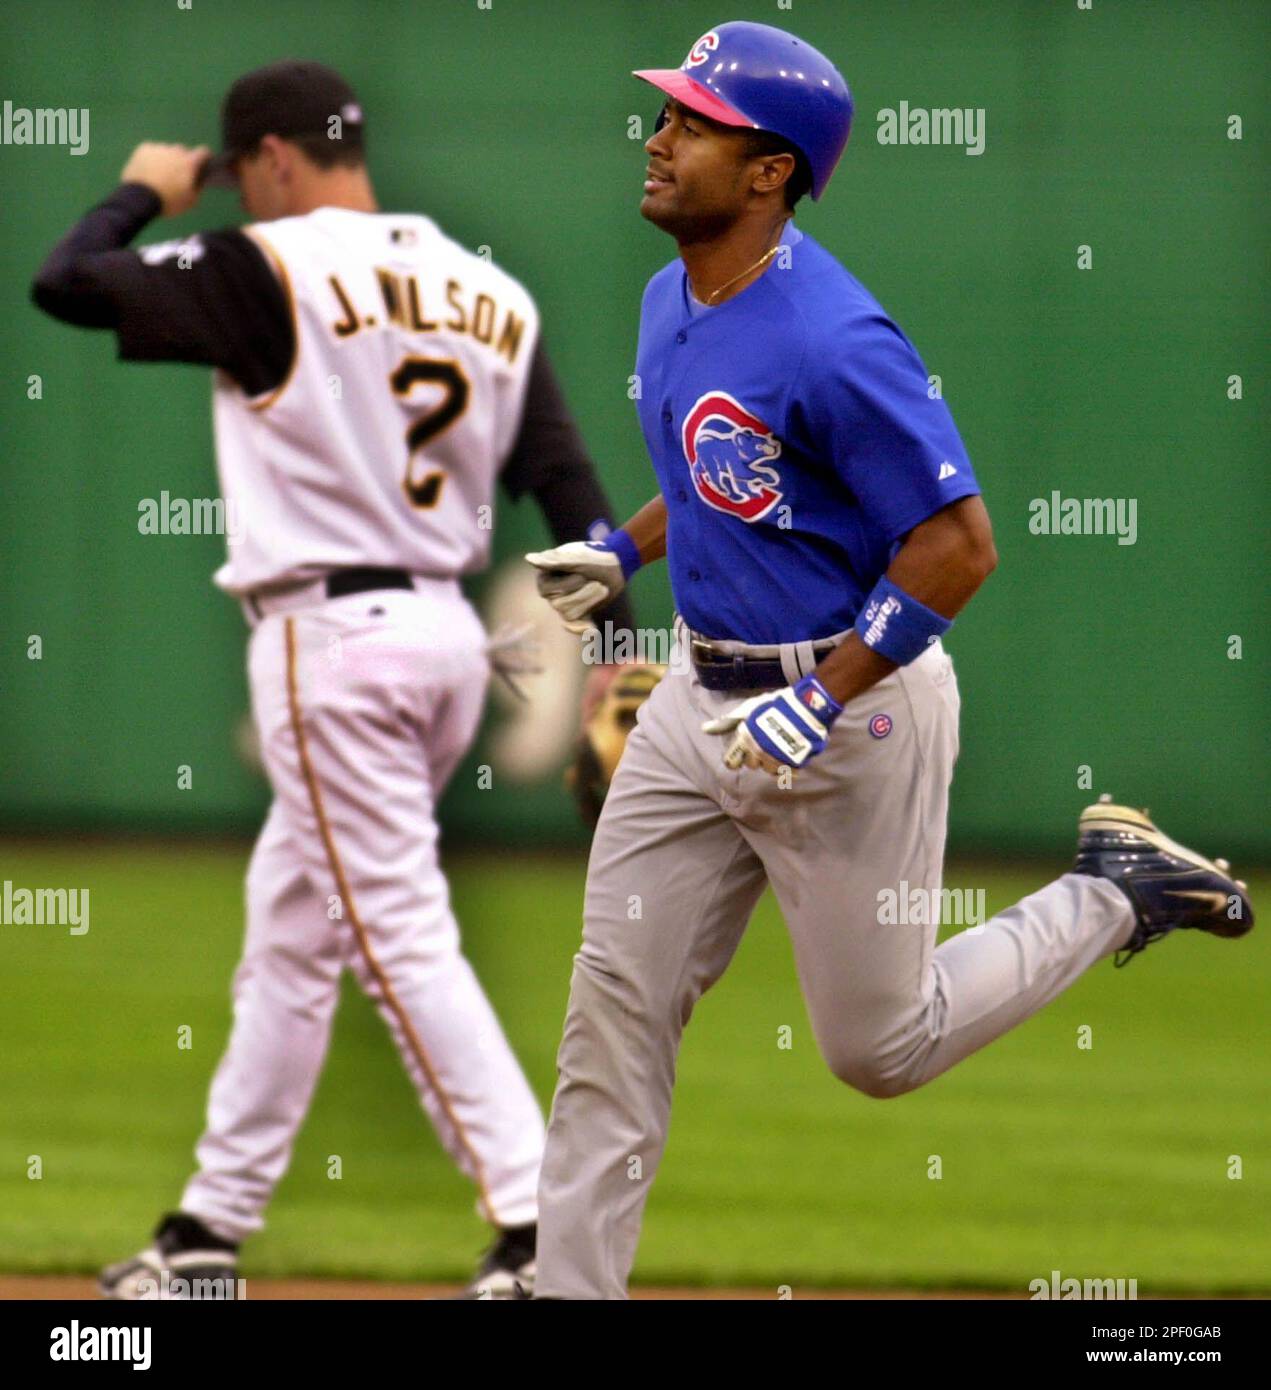 Chicago Cubs' Corey Patterson (20) steals third in front of Boston